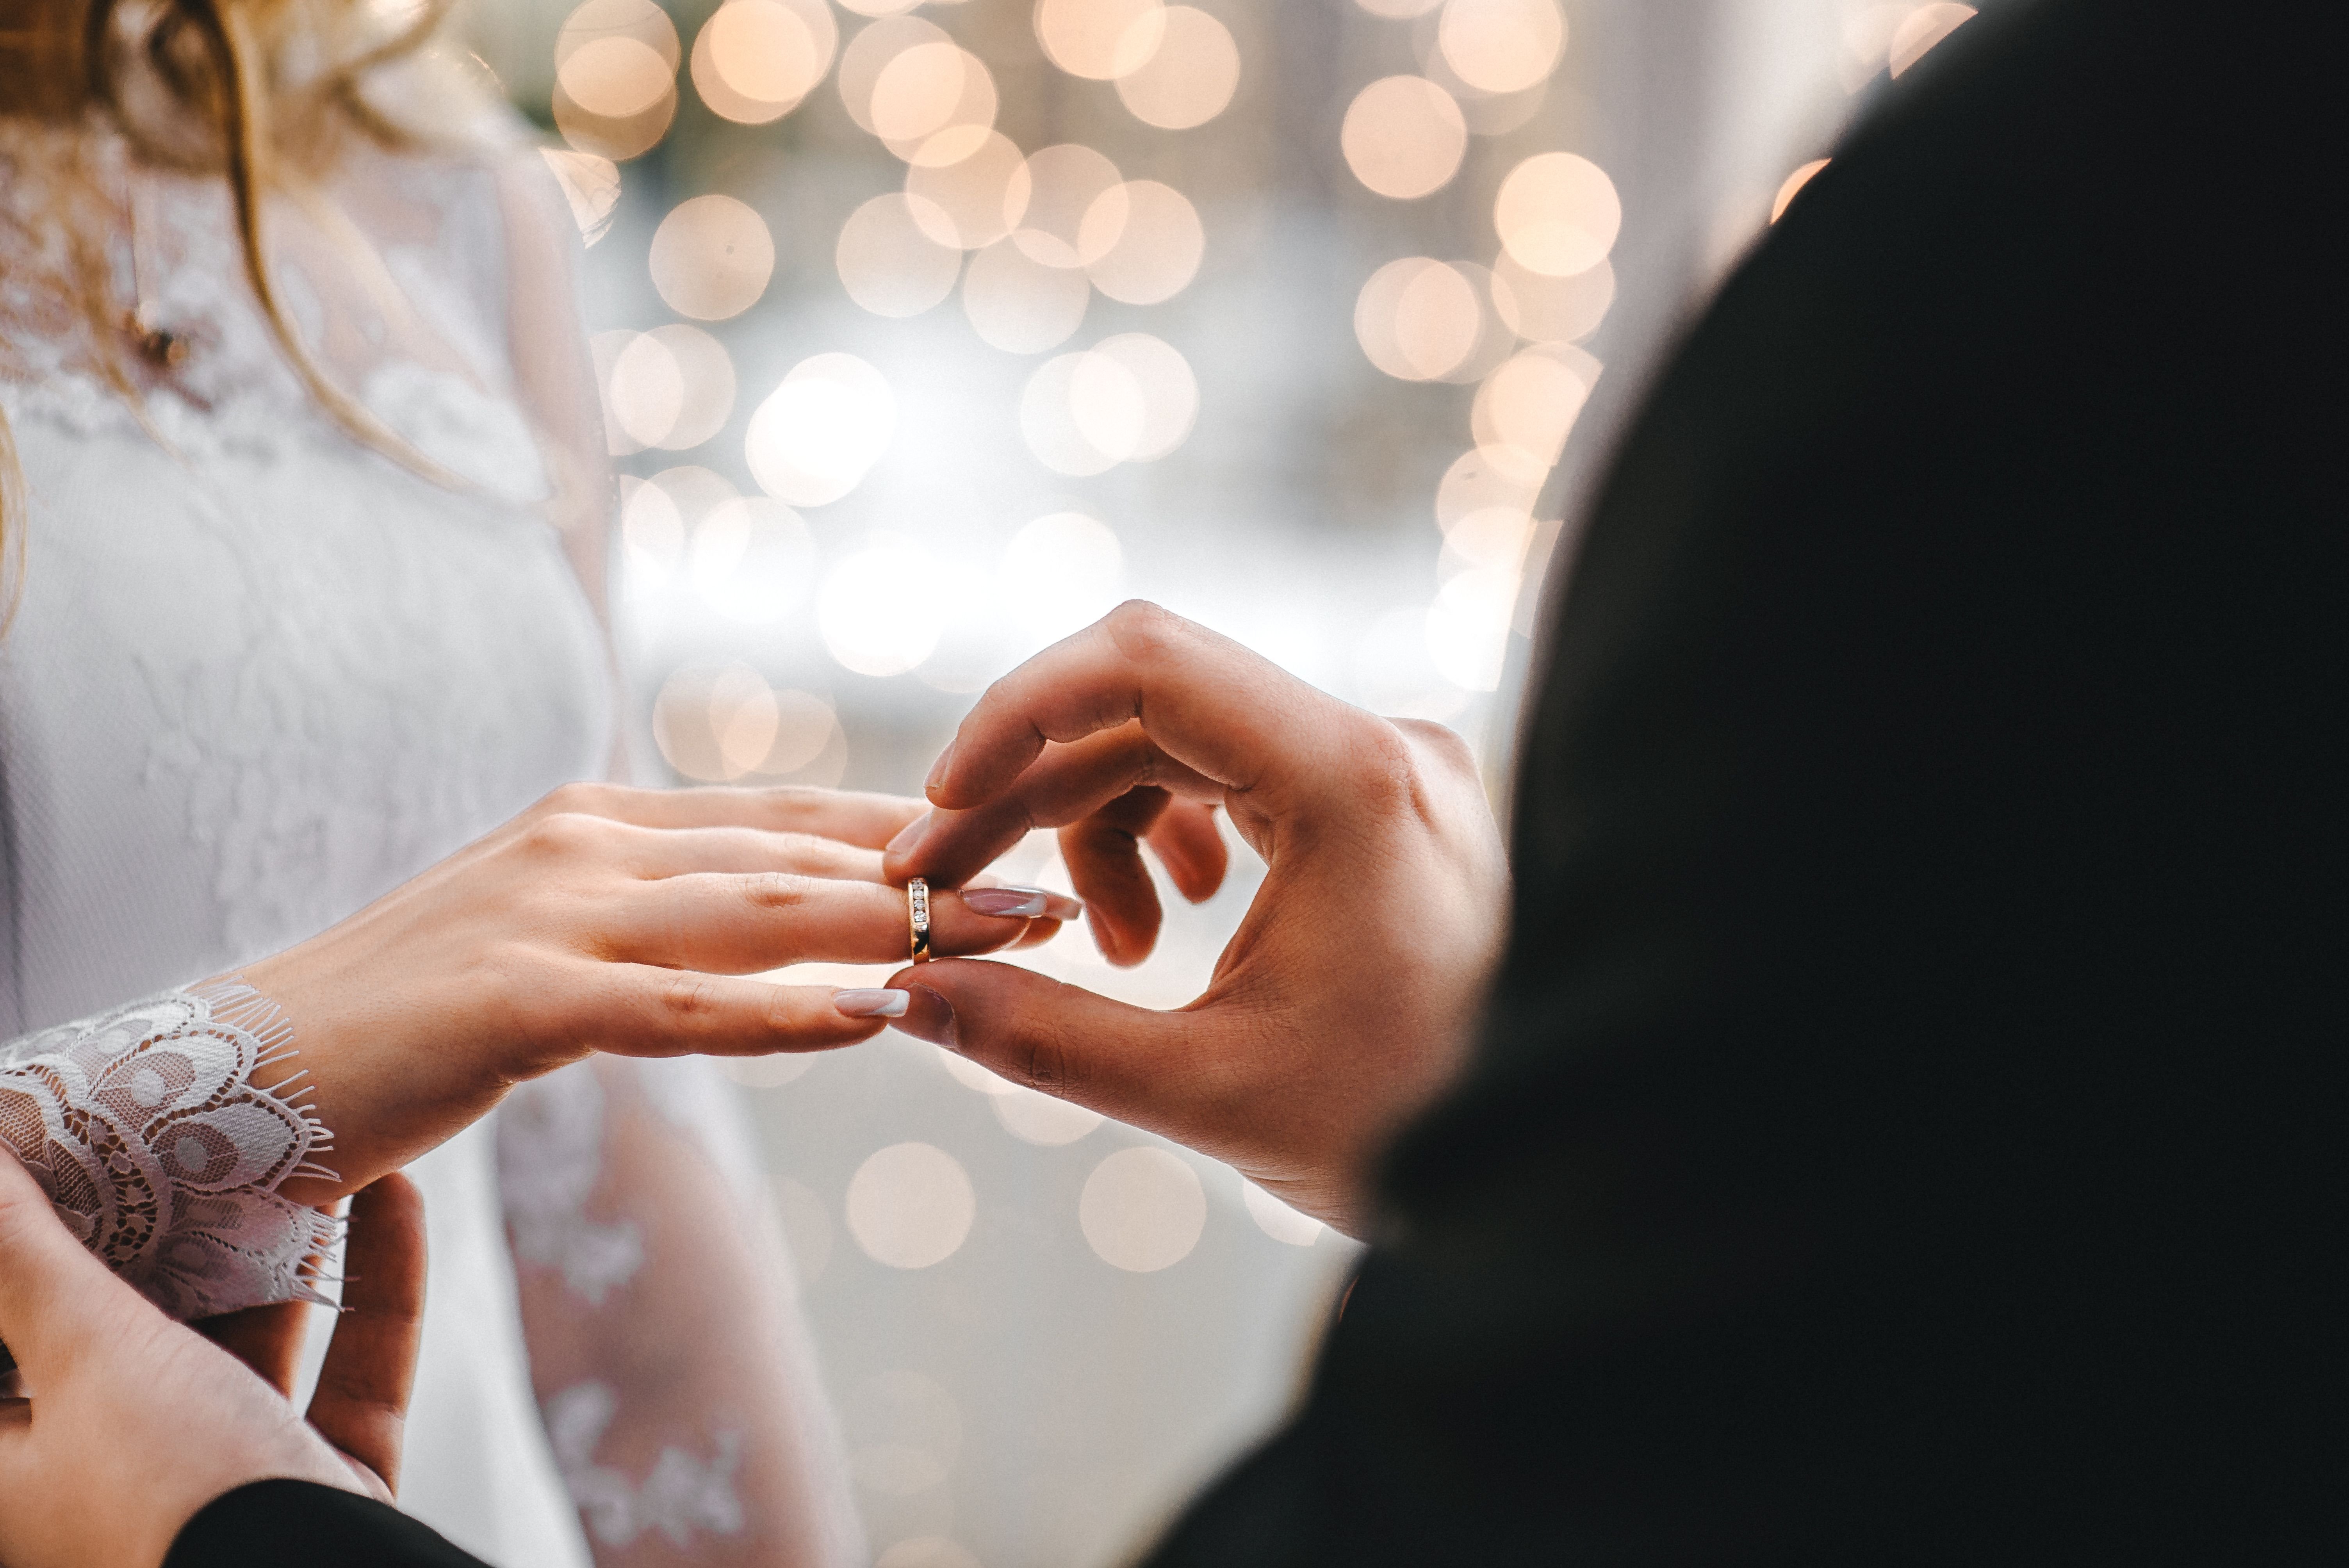 A man puts a wedding ring on his bride's finger. | Source: Shutterstock